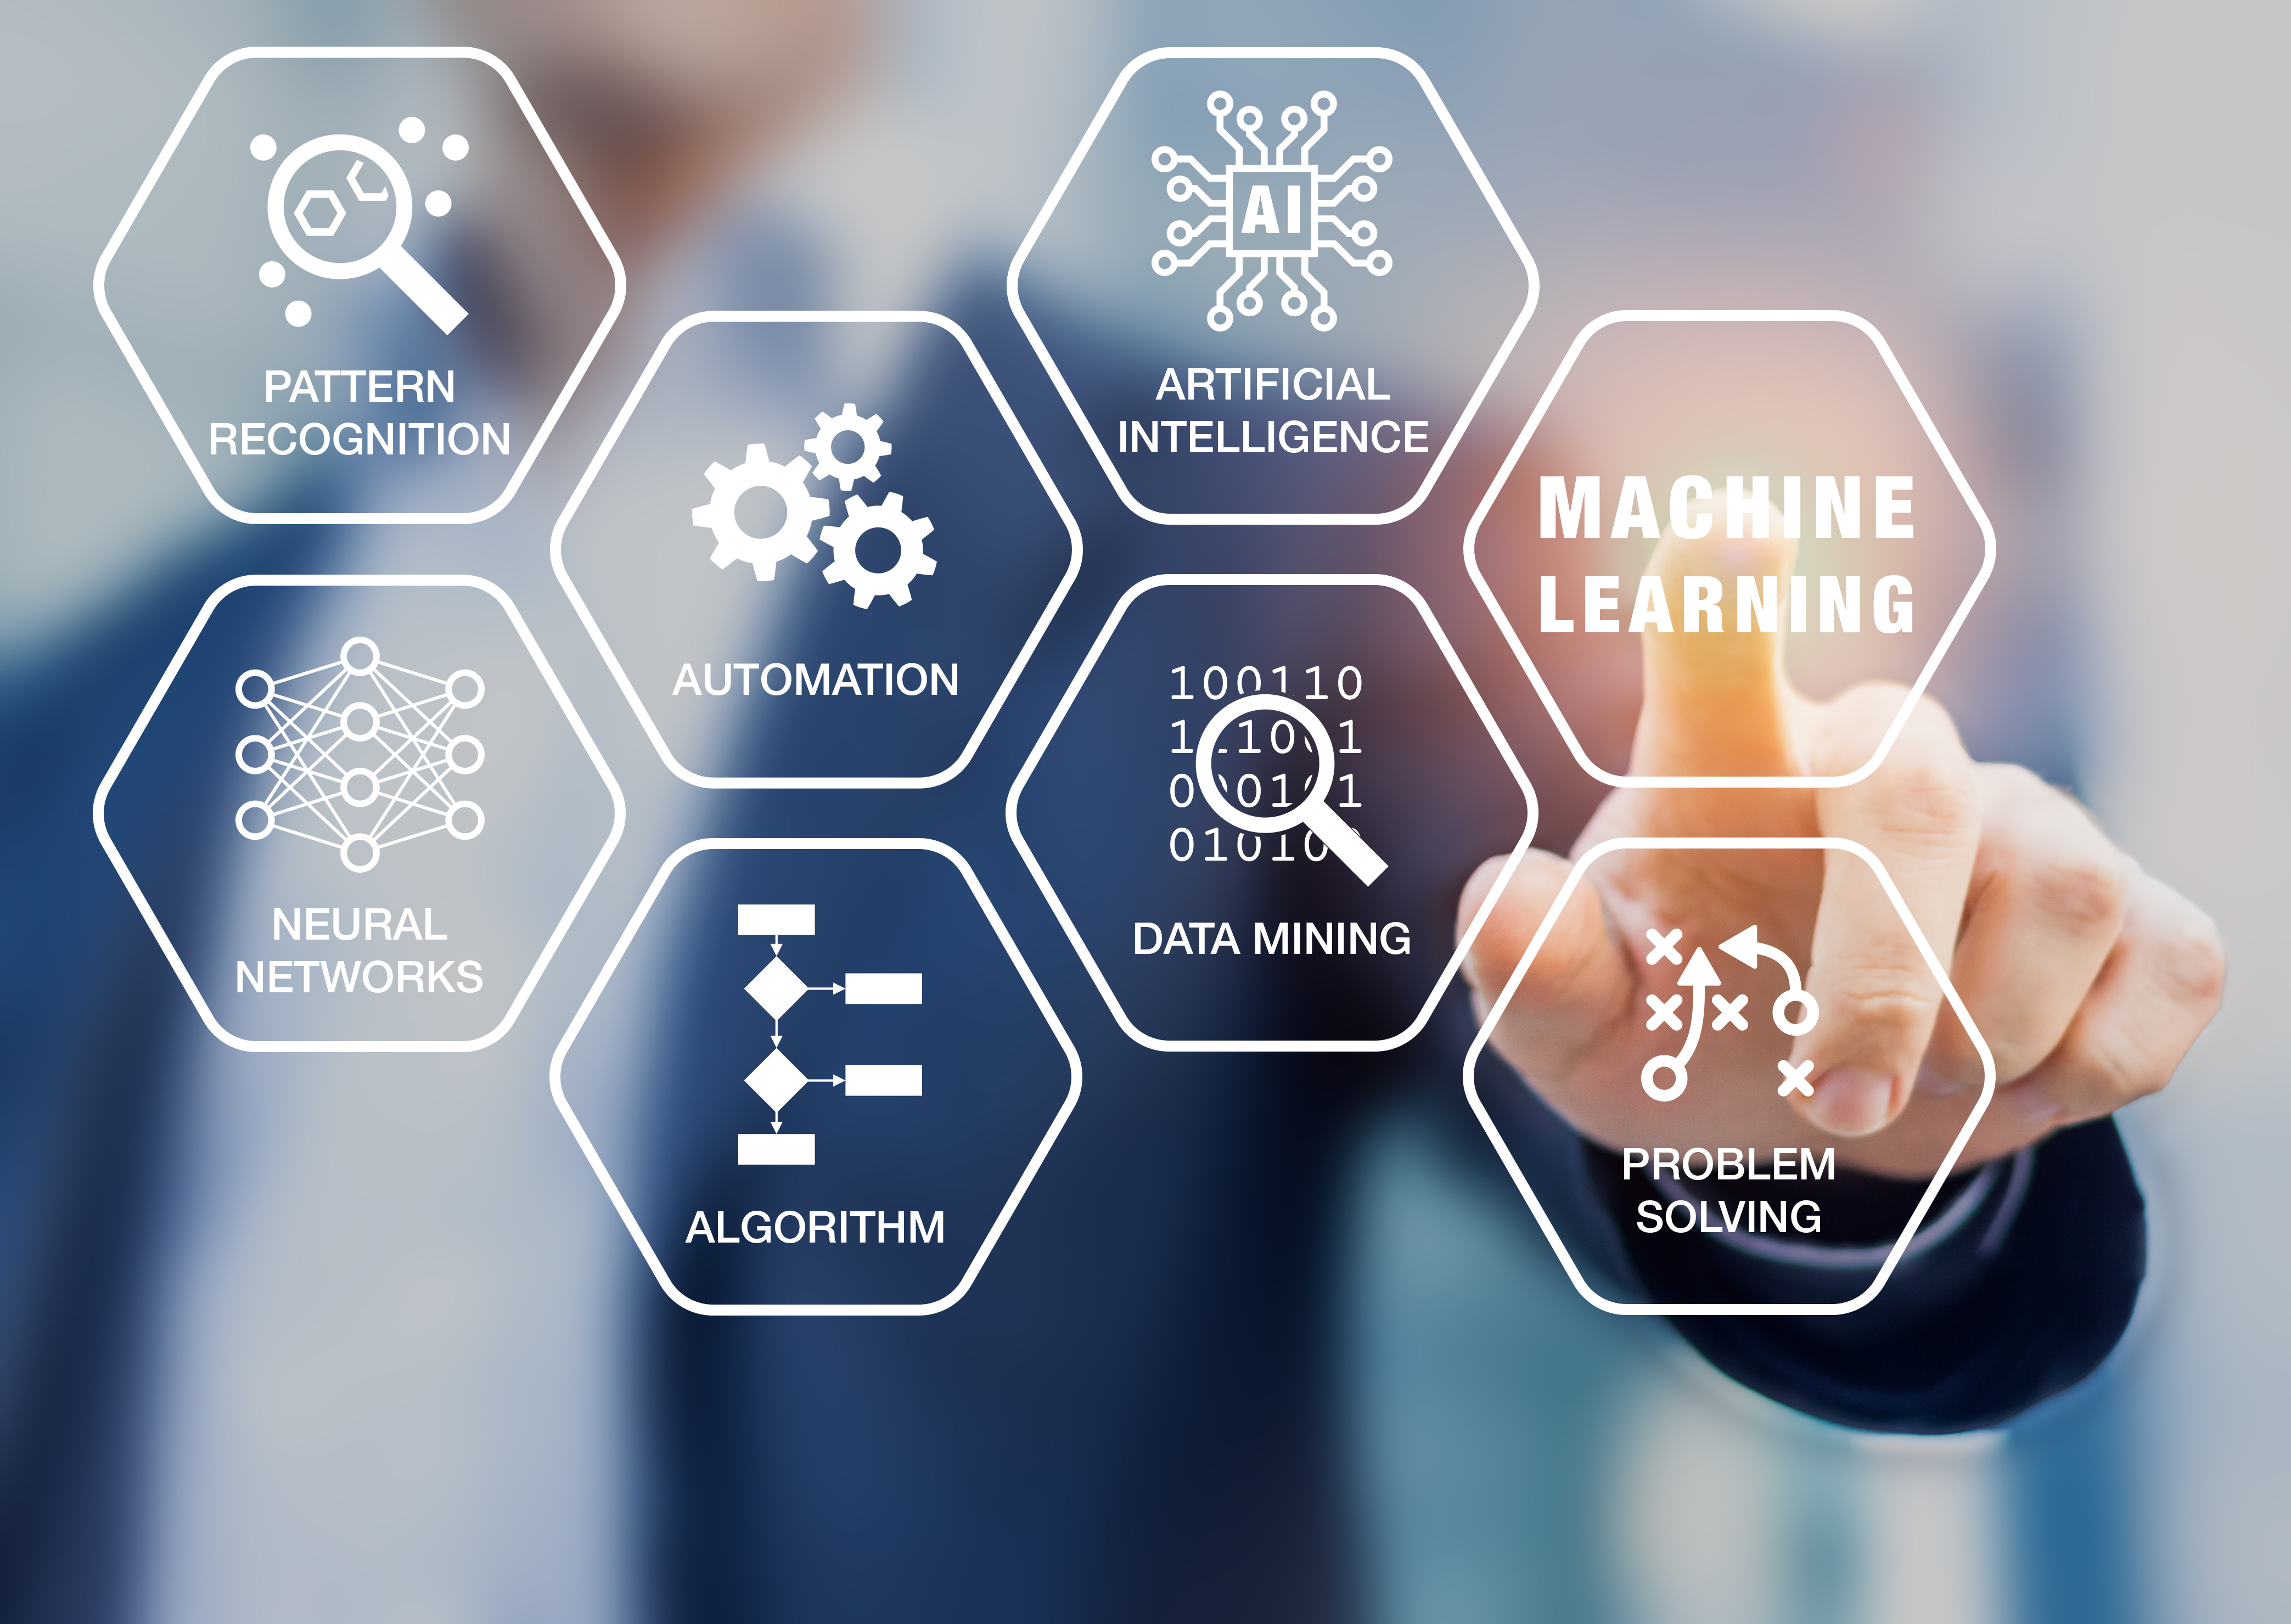 Thought Leader Thursday: Use of Machine Learning in the Automotive Industry